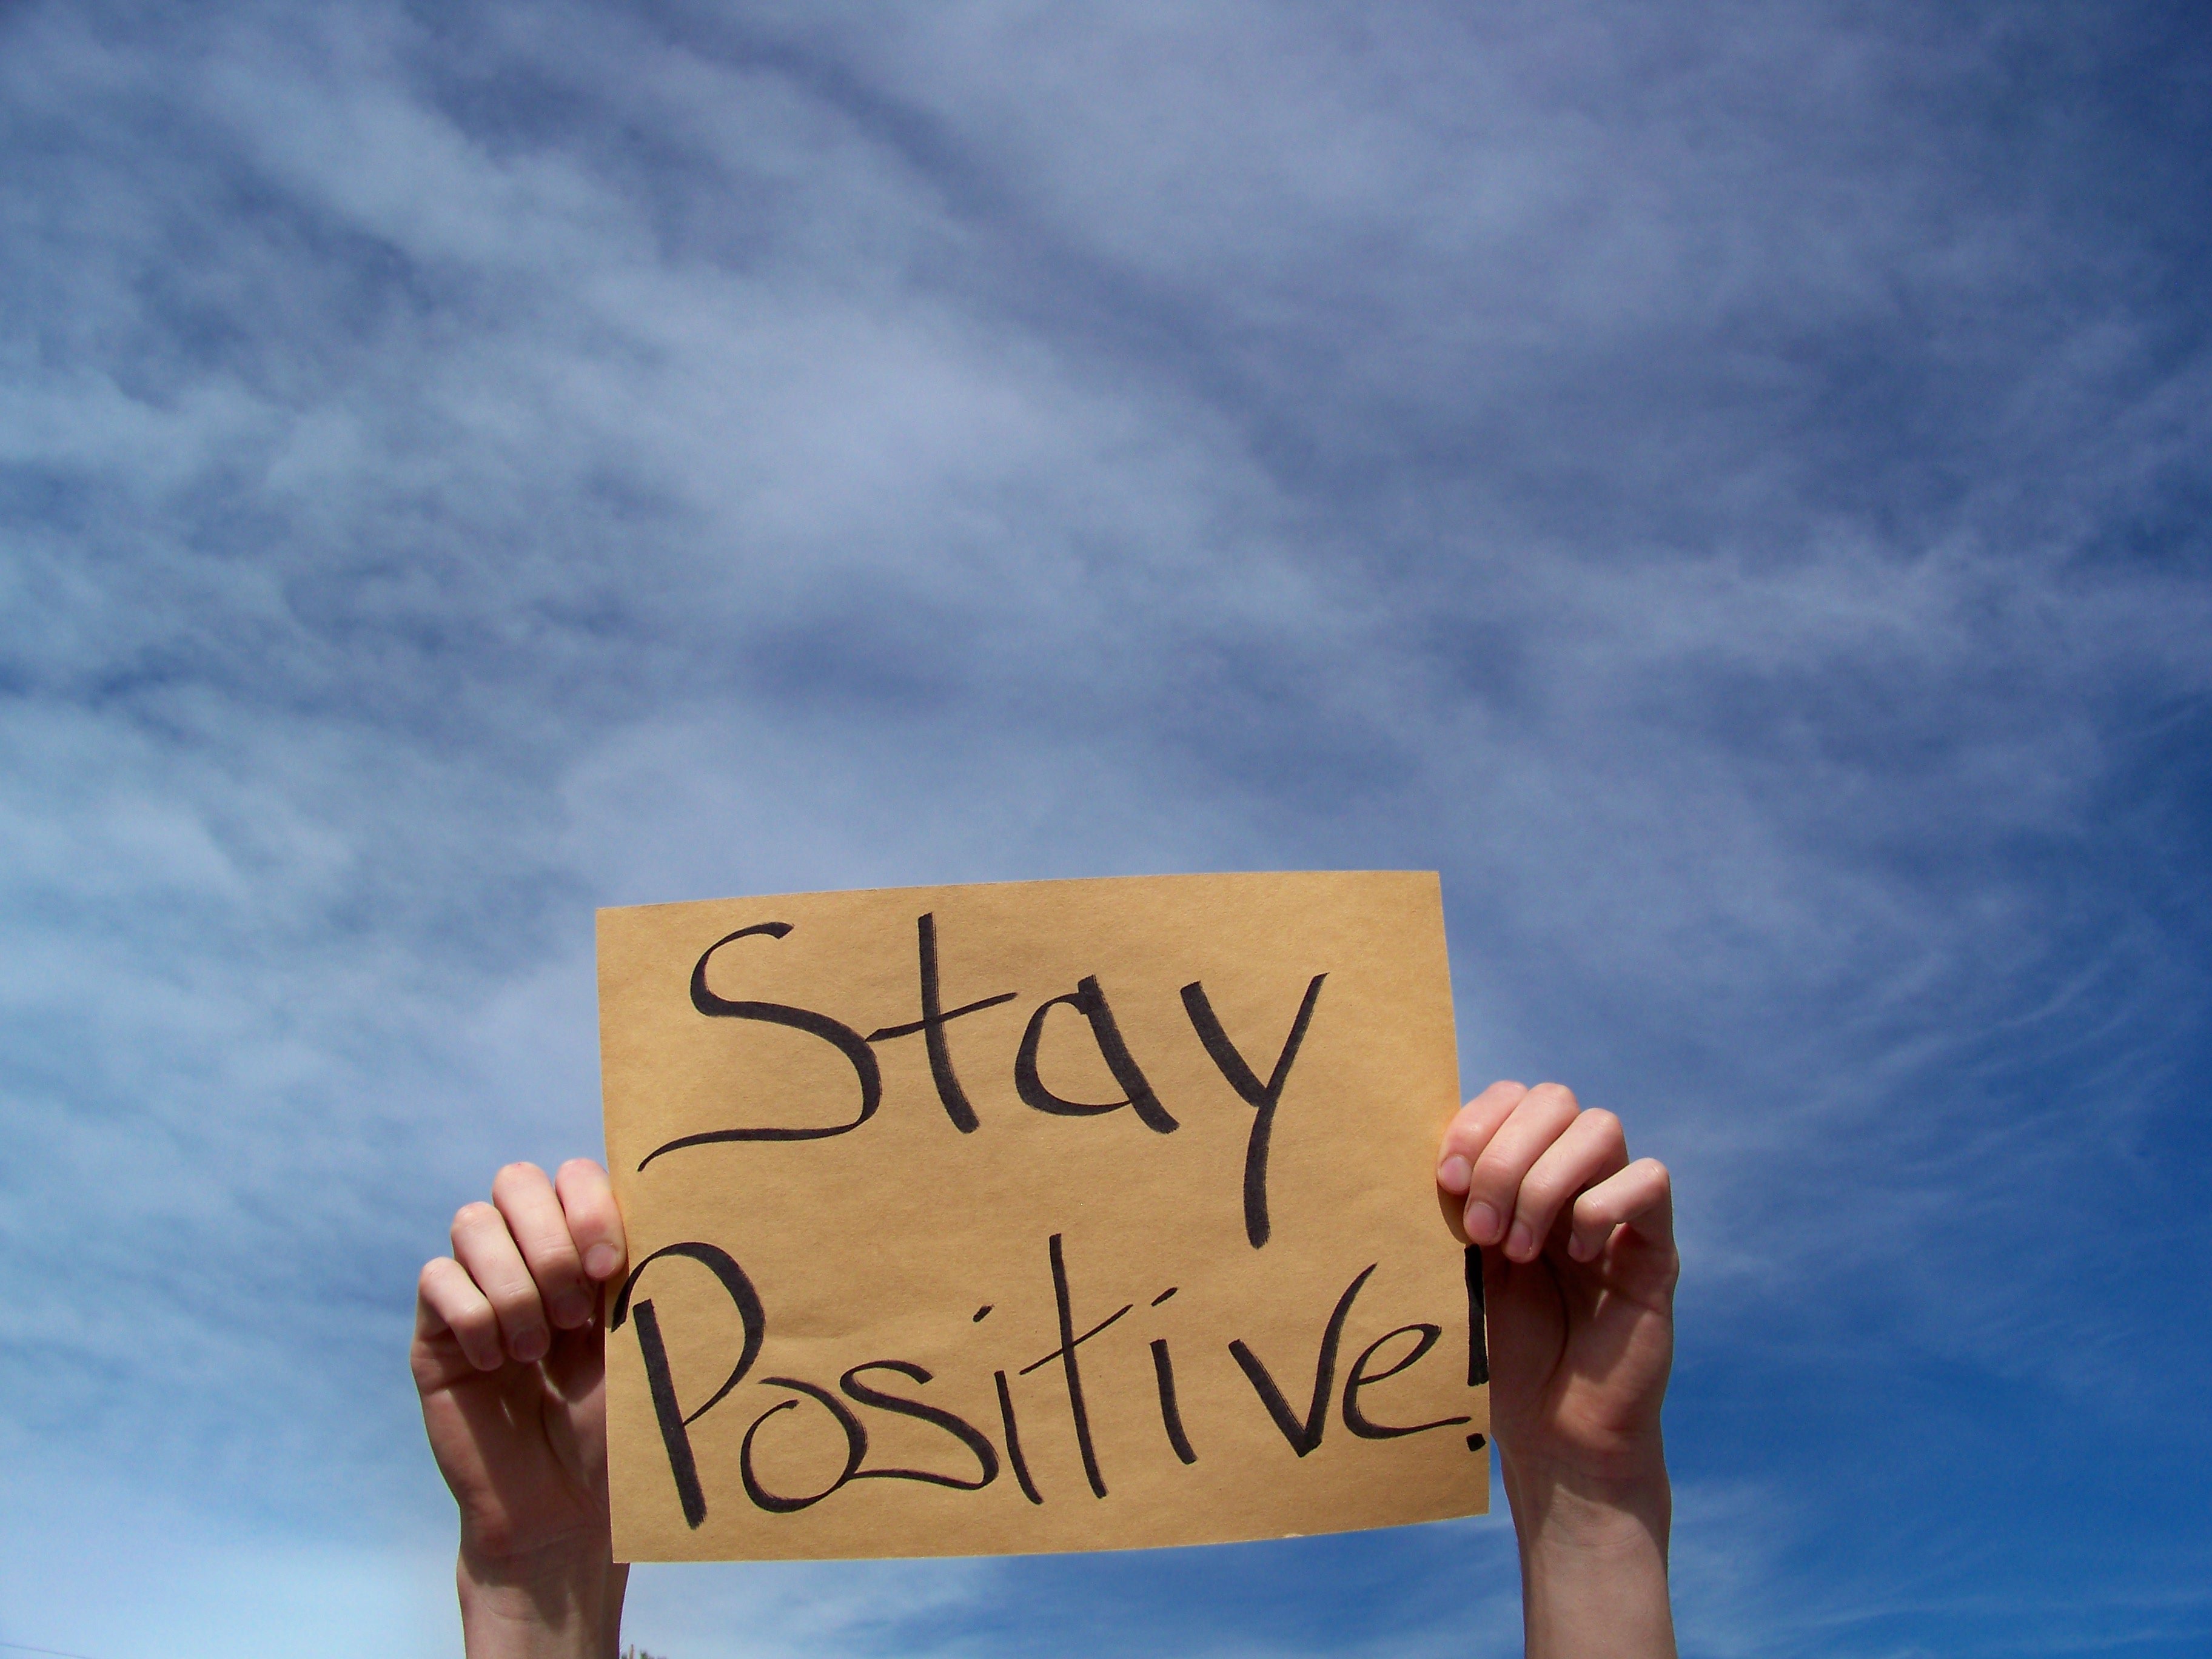 This year i want. Positive картинки. Think positive картинки. Stay positive картинки. Stay positive обои.